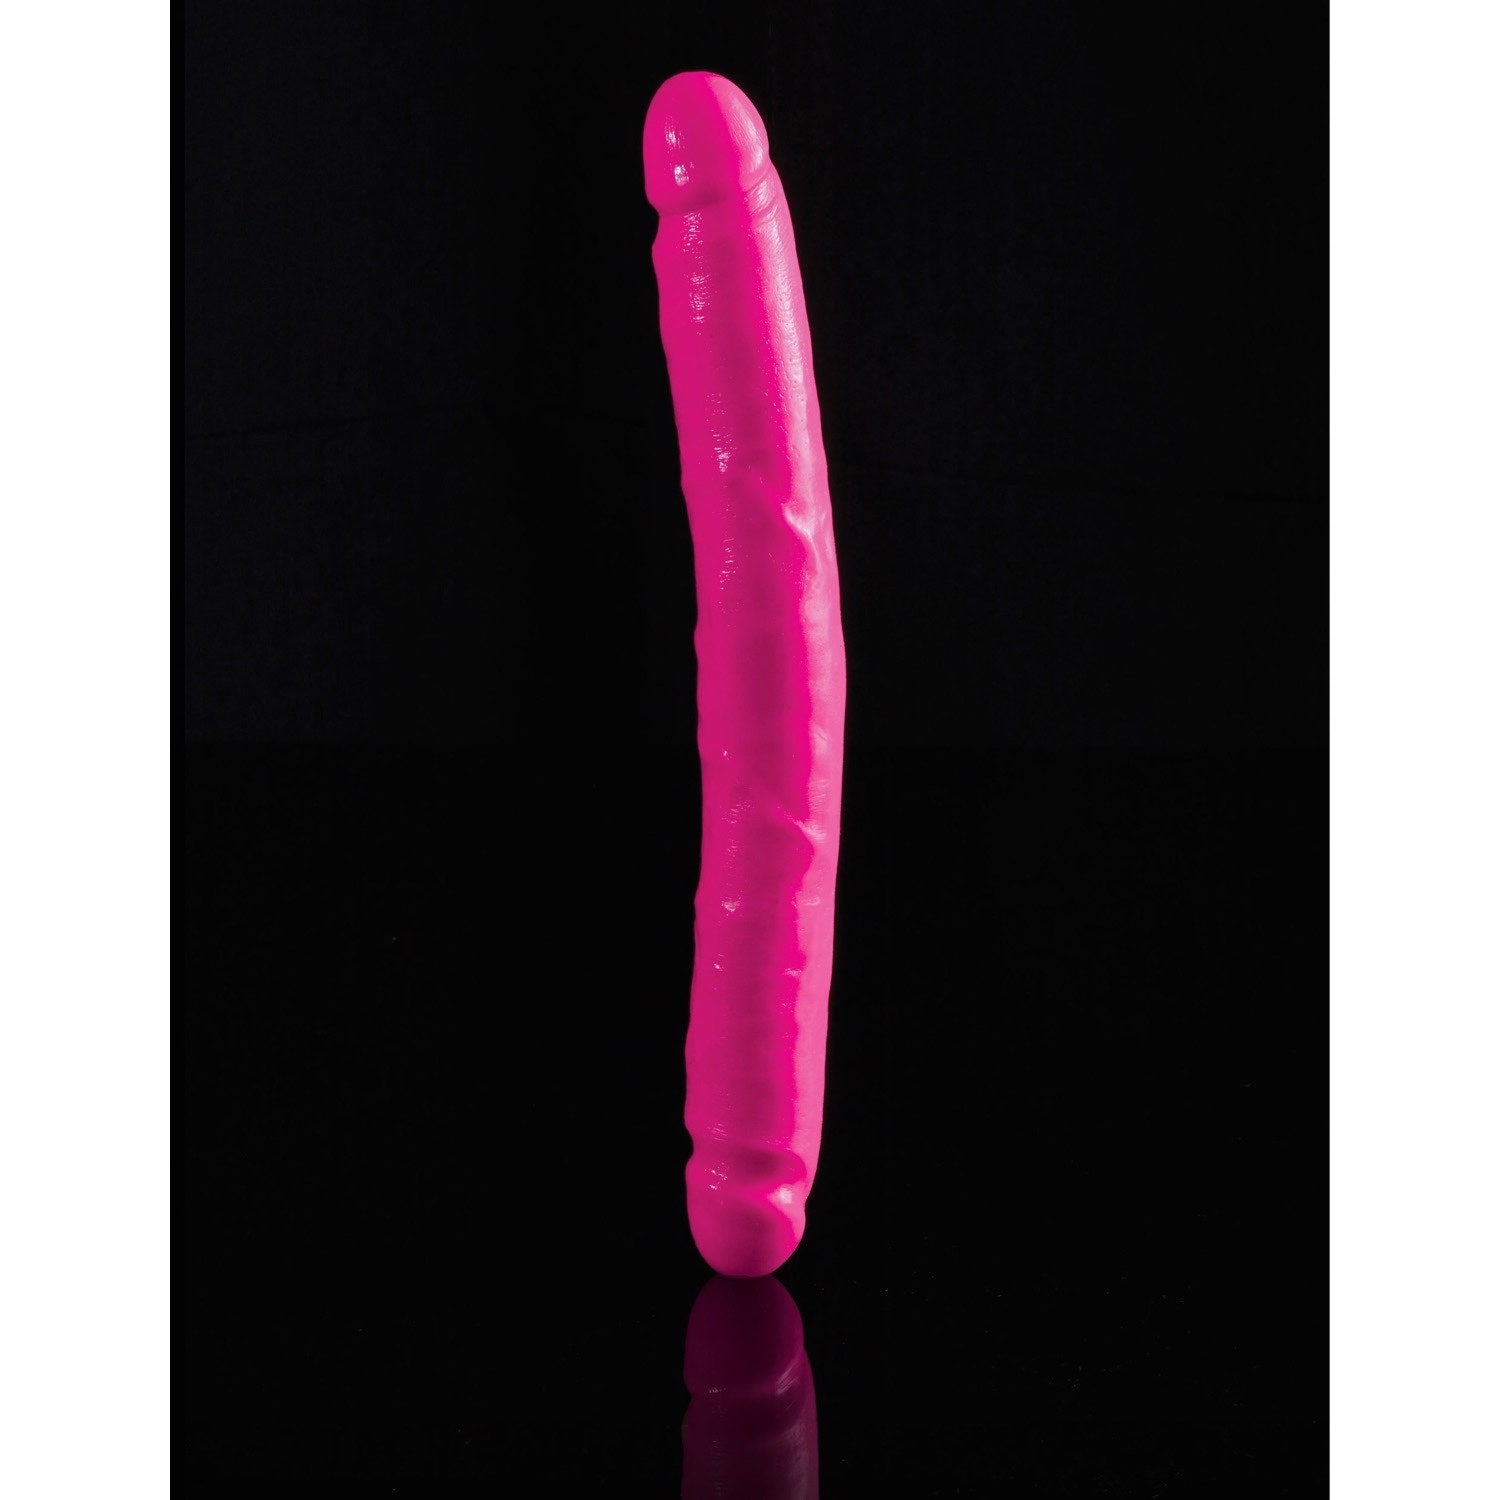 Dillio 12&quot; Double Dong - Pink 30.5 cm by Pipedream